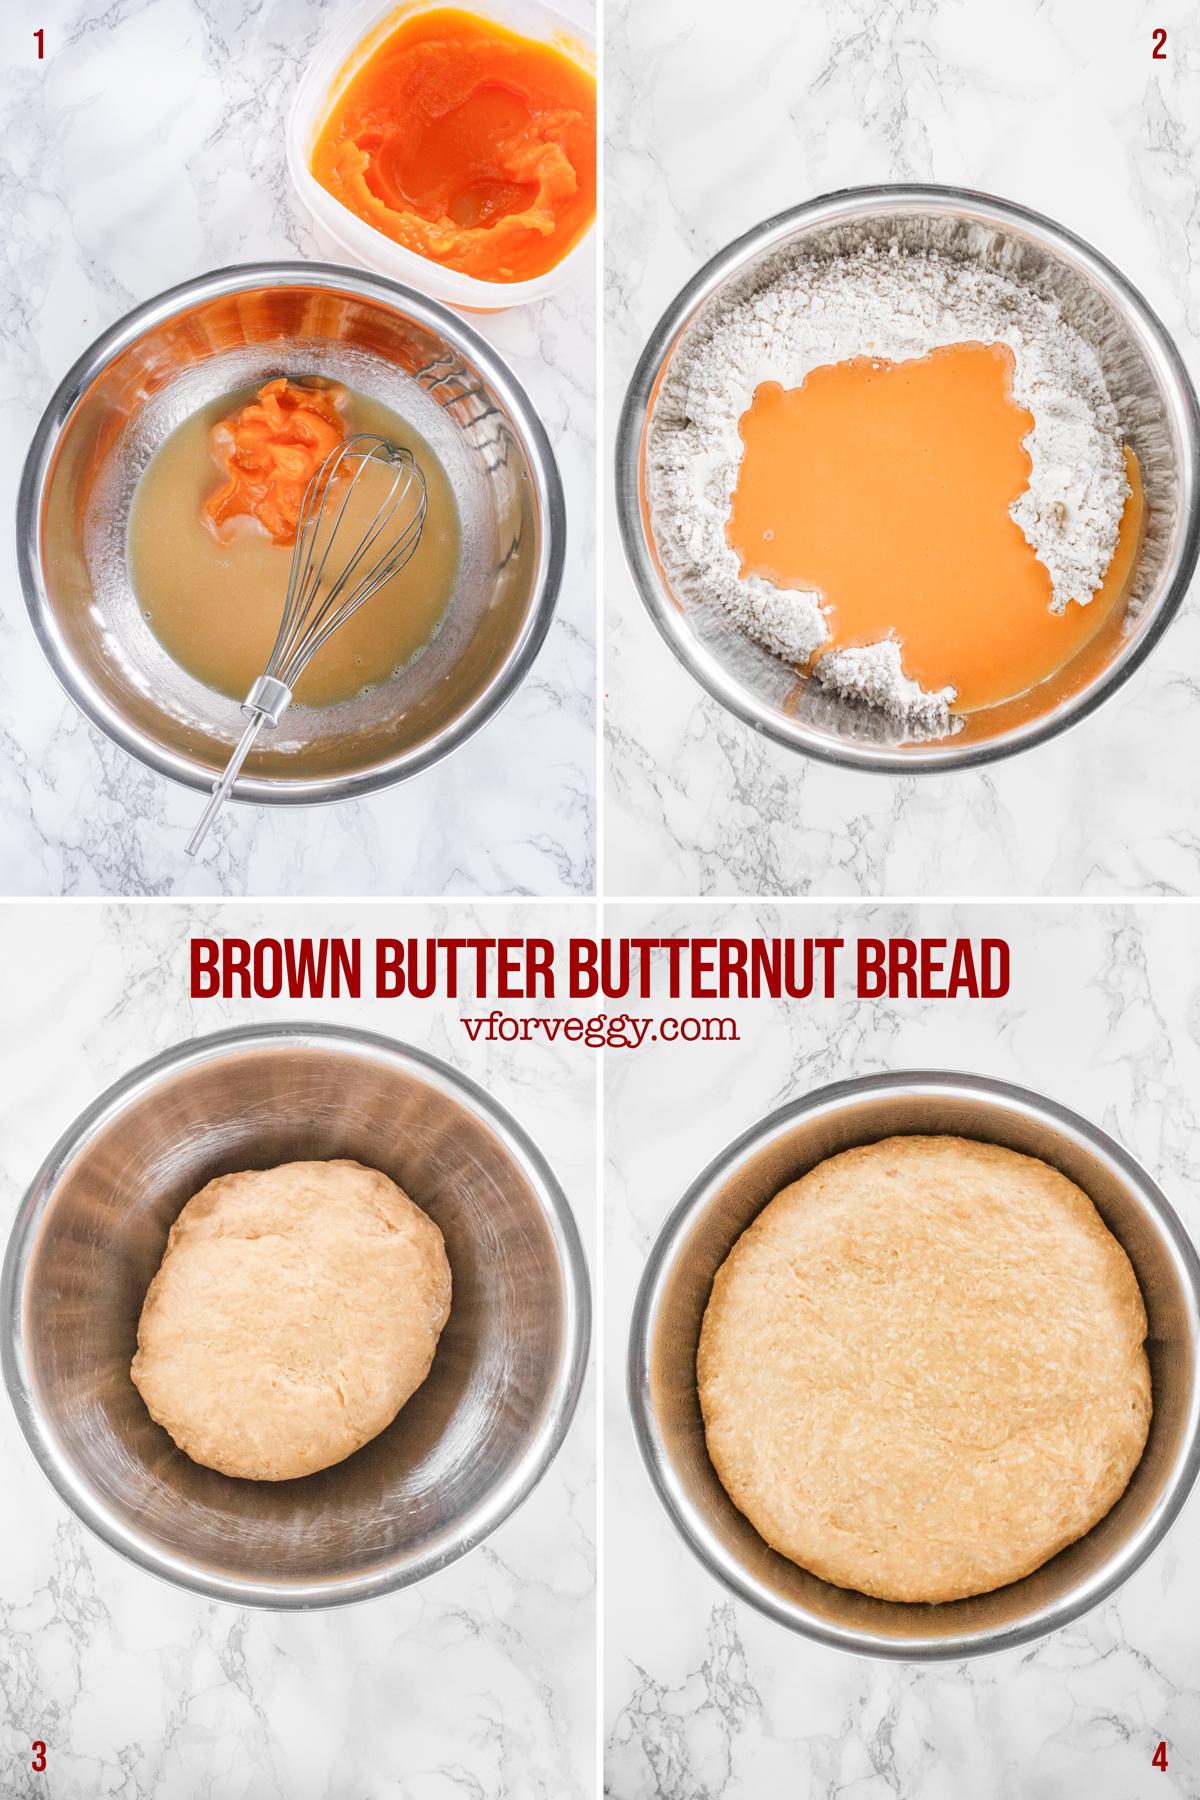 (1) Milk, browned butter, egg, and butternut puree. (2) Mix dry ingredients with wet ingredients. (3) Knead the dough. (4) Proof the dough.